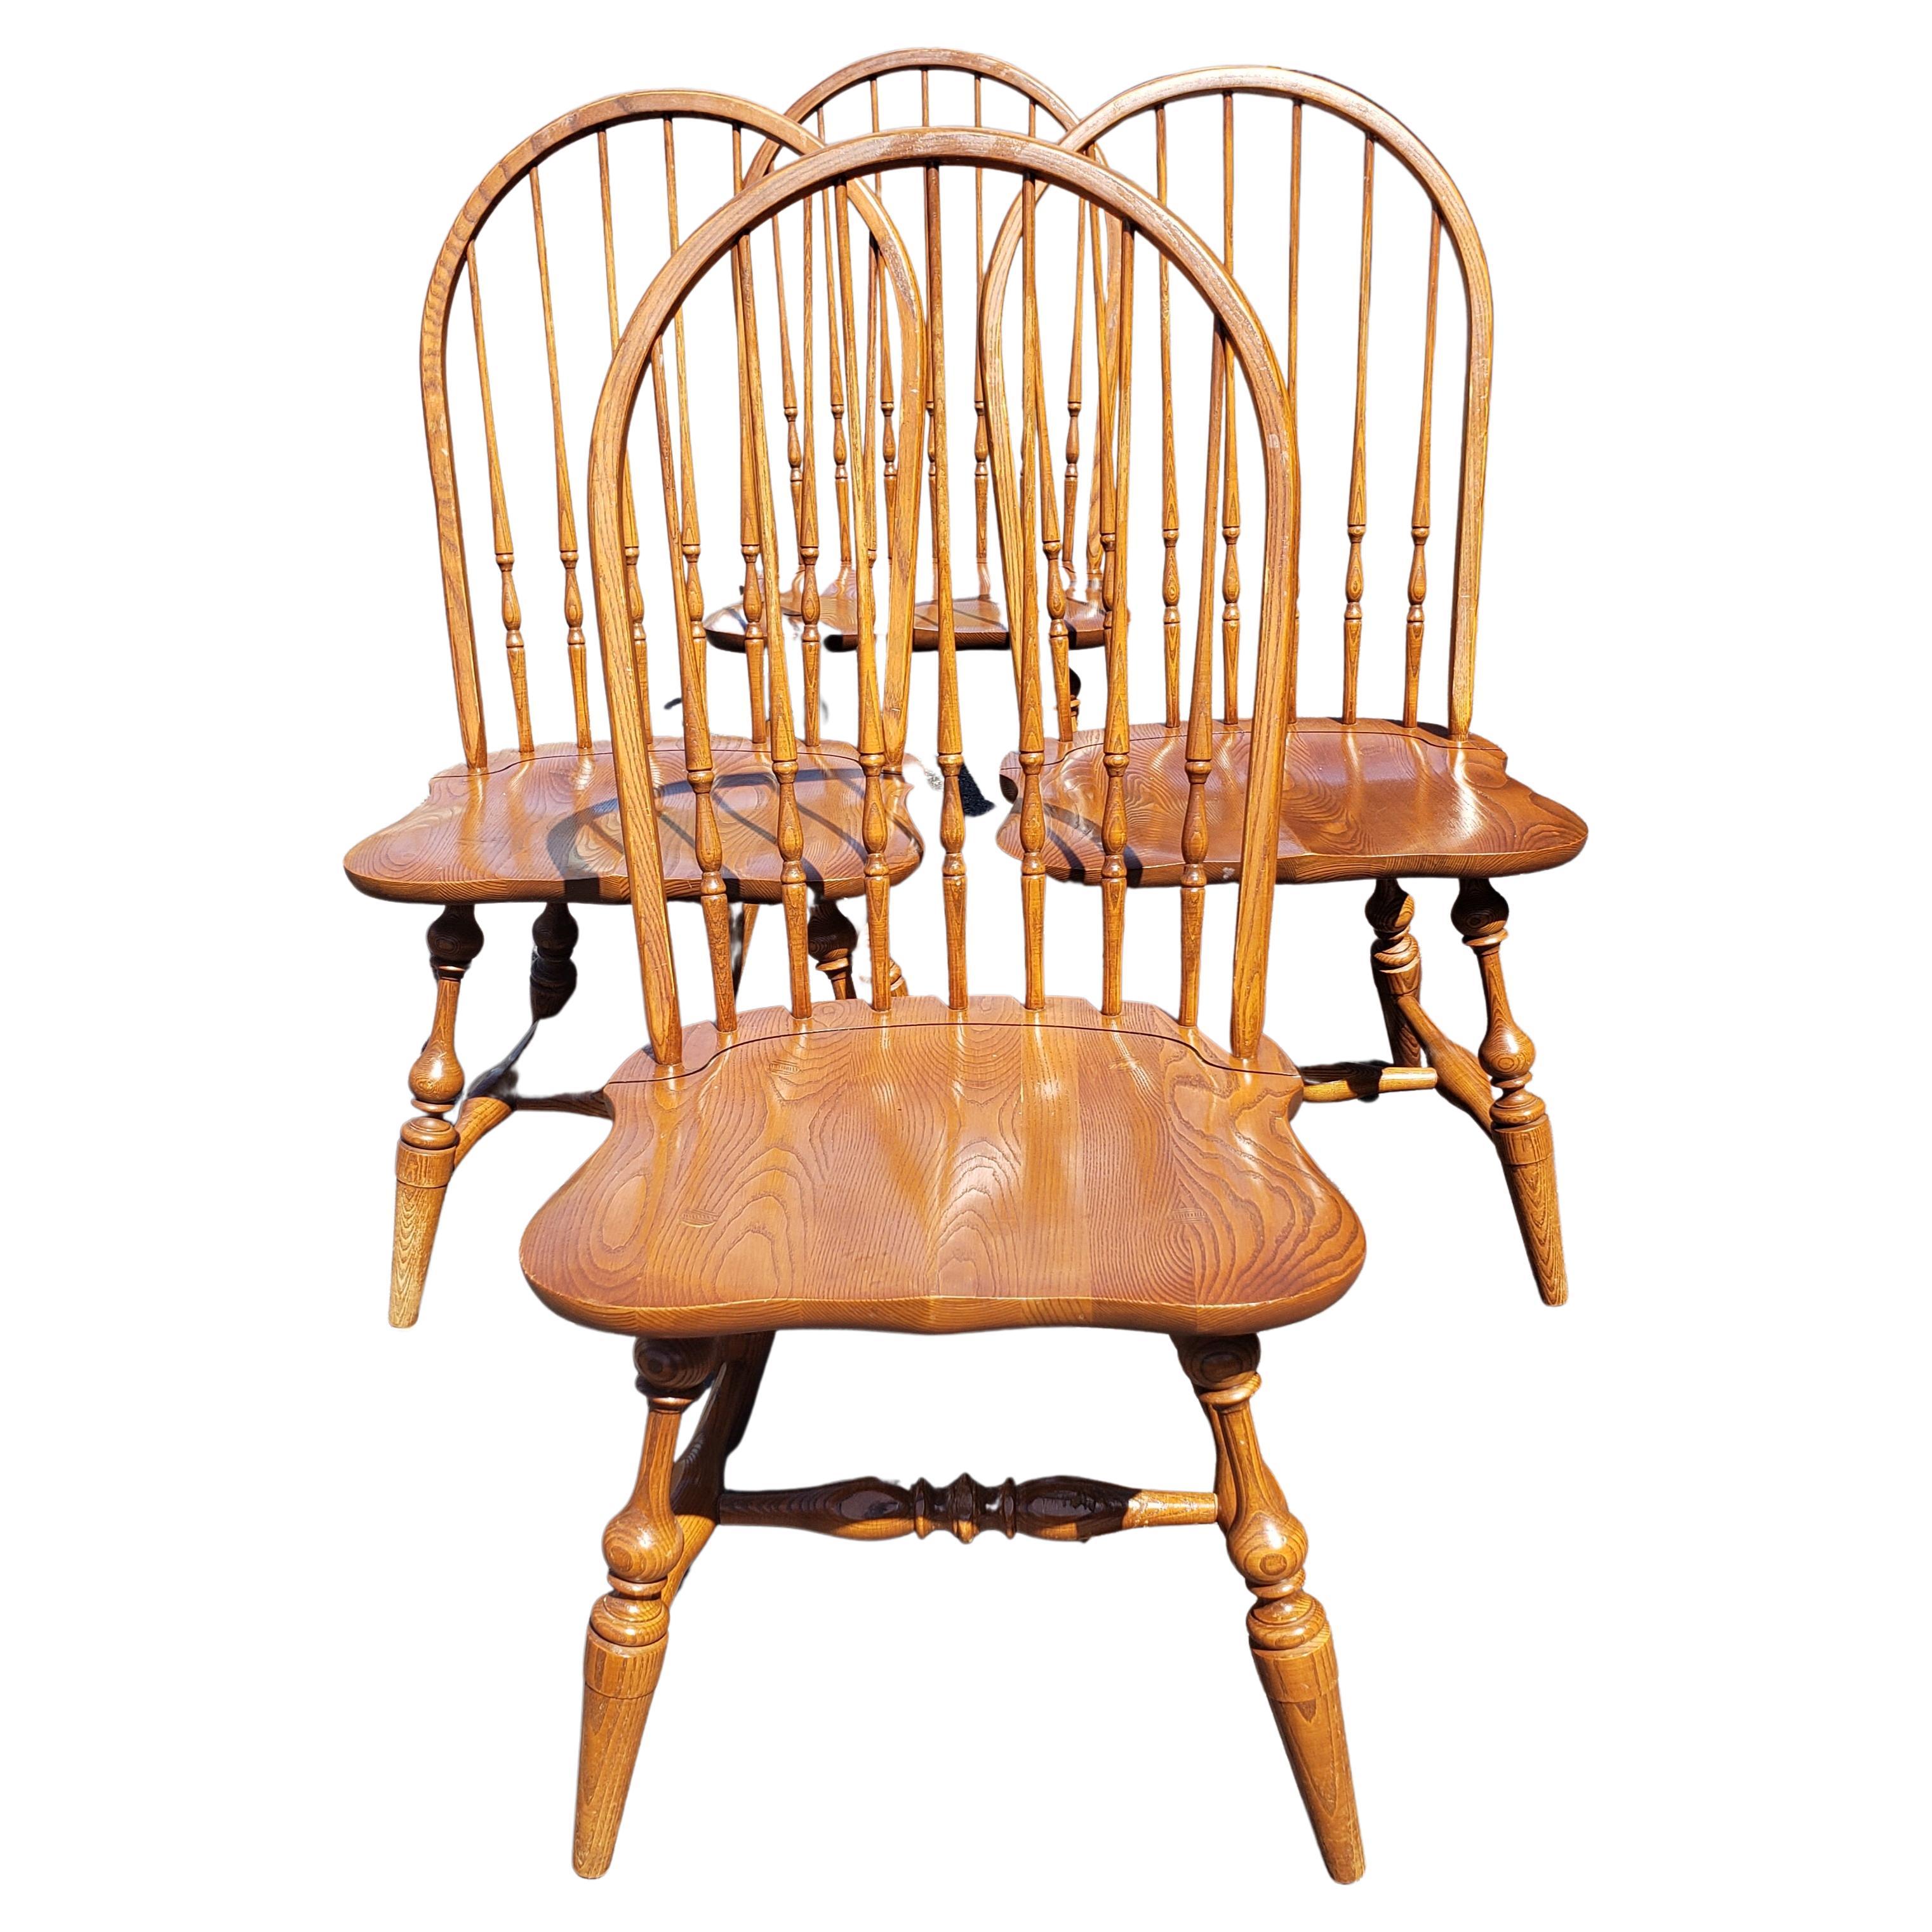 Set of 4 original Lambert Hitchcock quarter sawn oak mission dining chairs. Saddle seats. Seven beautiful spindles back. Good vintage condition.

W5041622.